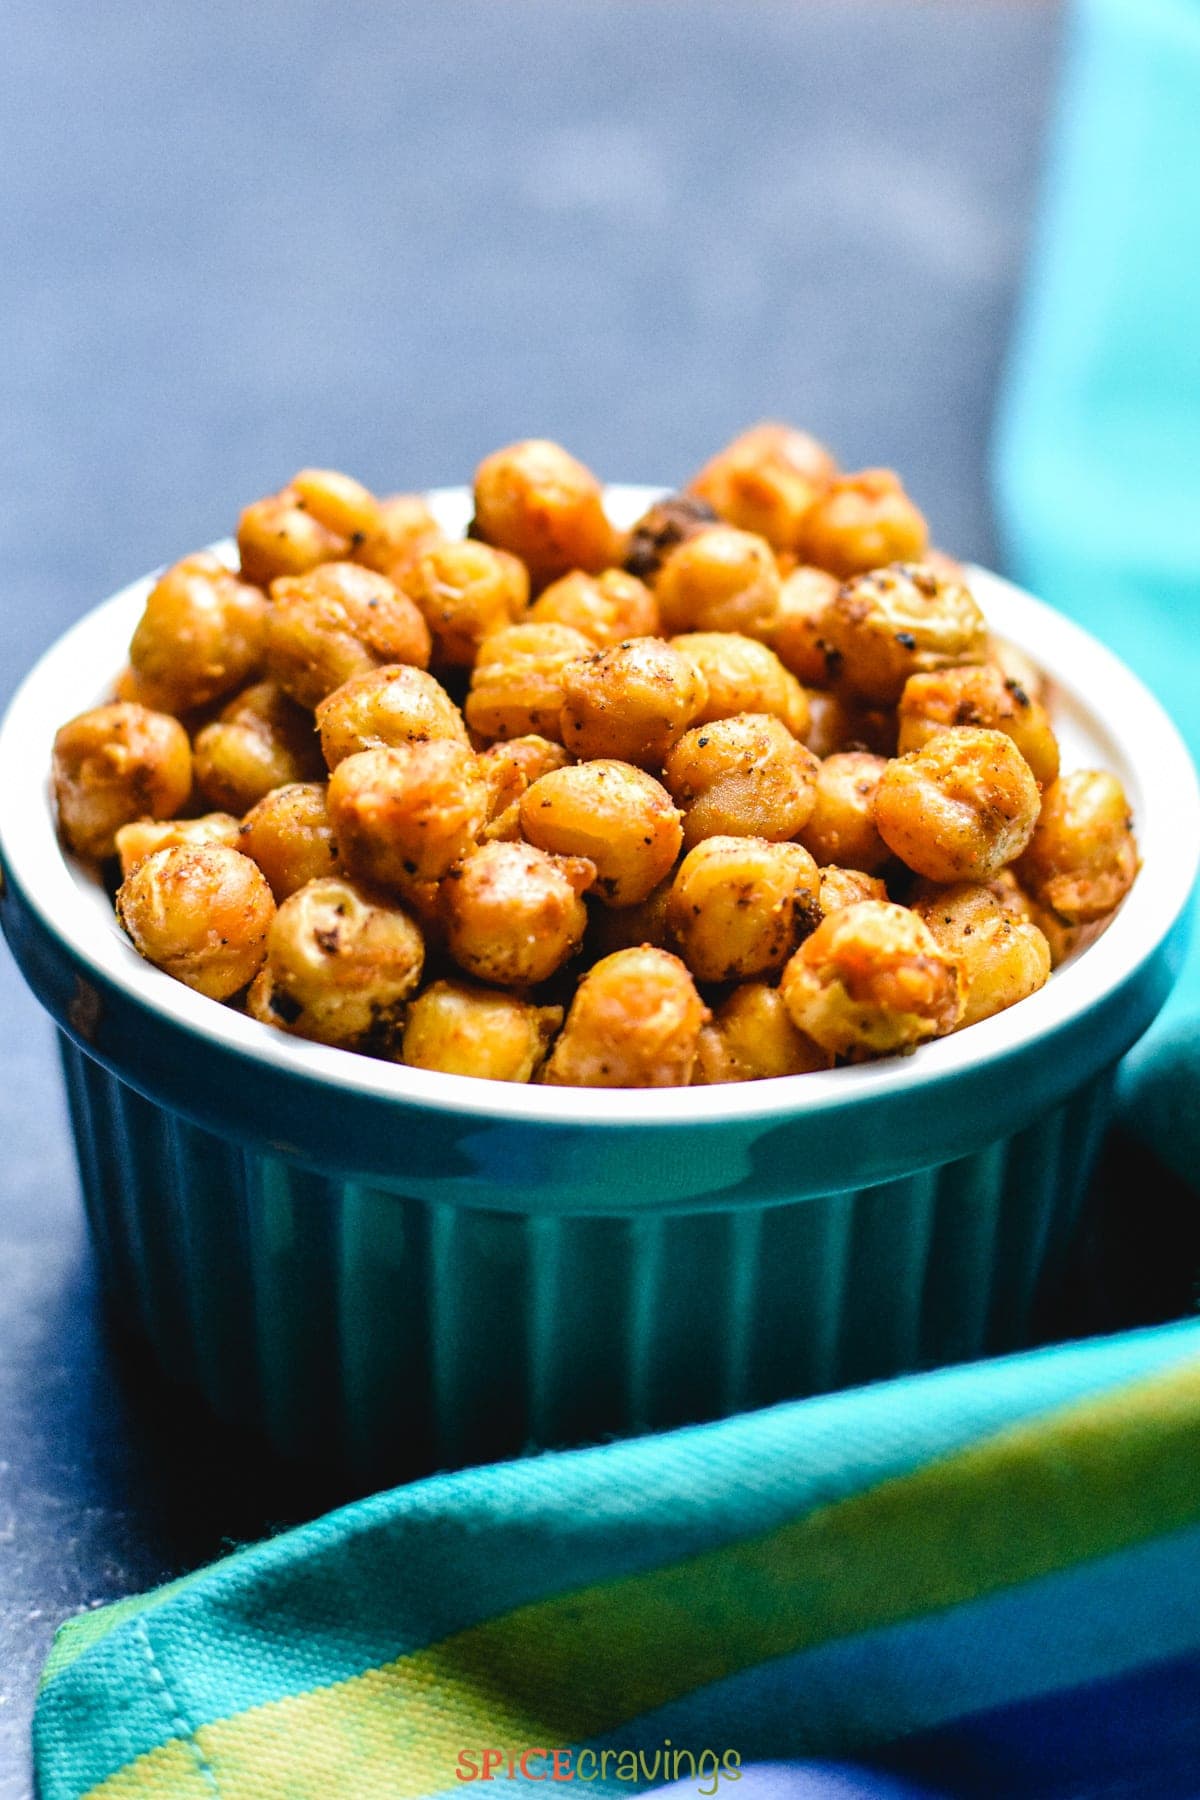 roasted spiced chickpeas in small blue ramiken